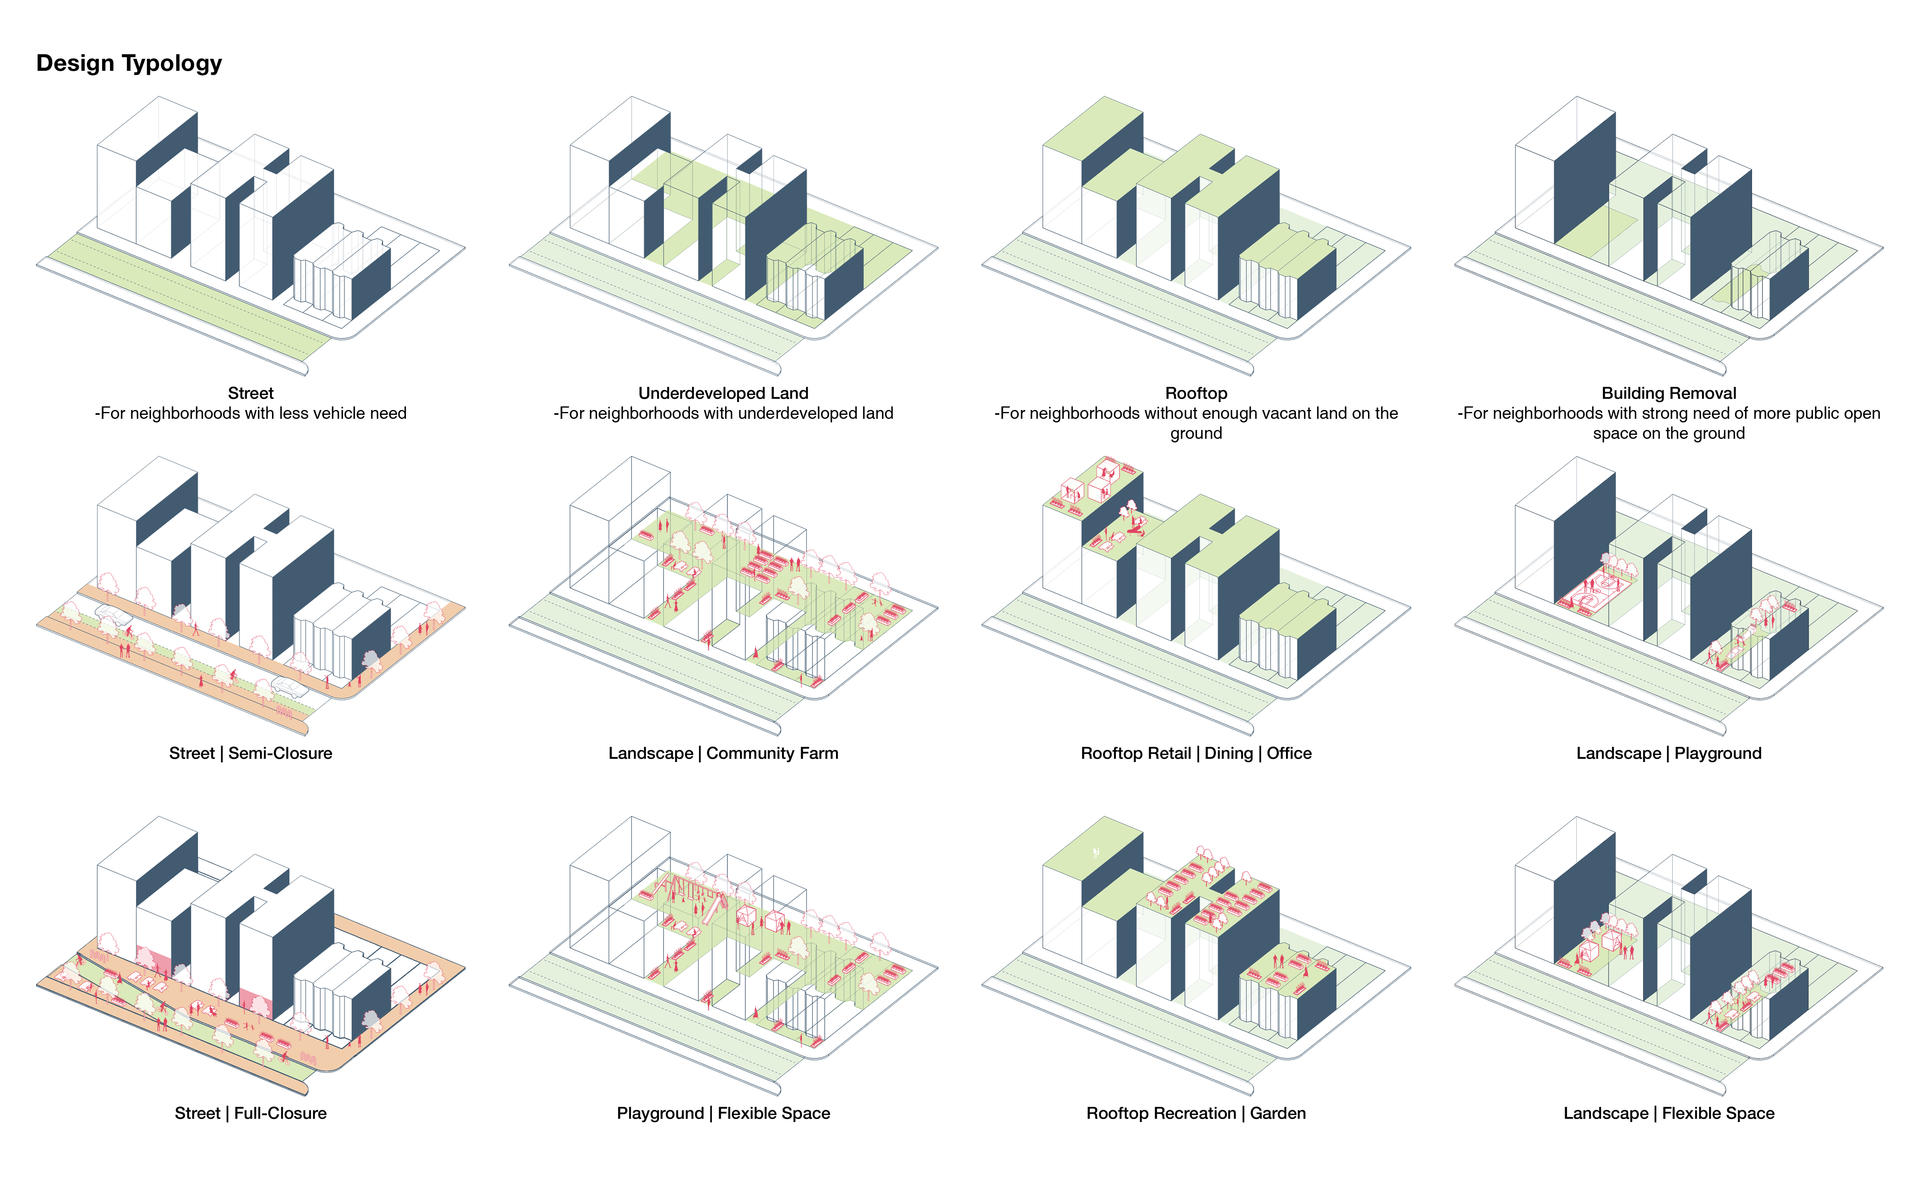 A series of diagrams for the four level of design typologies: Street, Underdeveloped Land, Rooftop, and Building Removal.